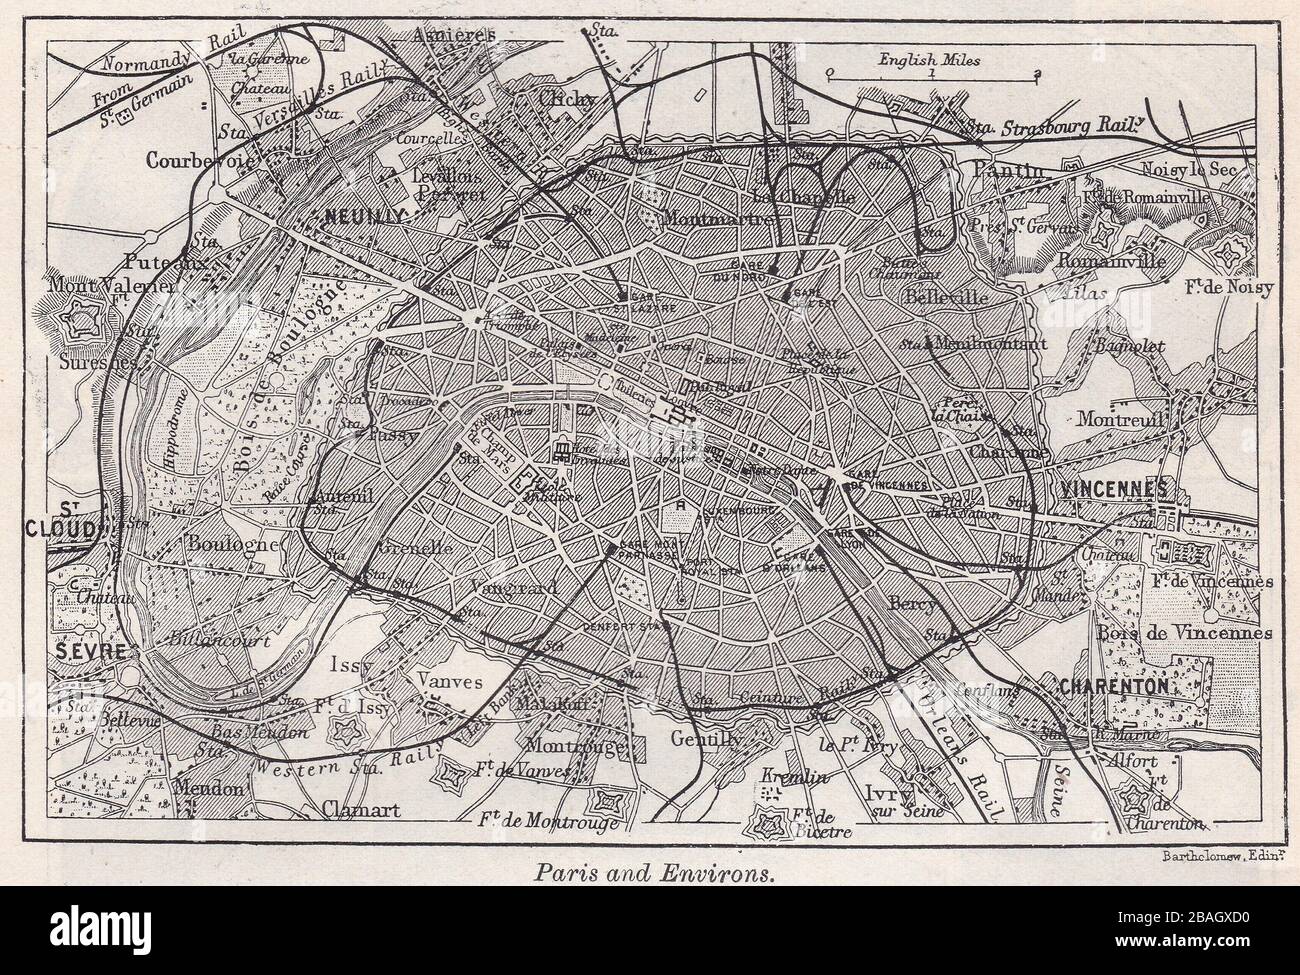 Vintage map of Paris and Environs 1900s. Stock Photo